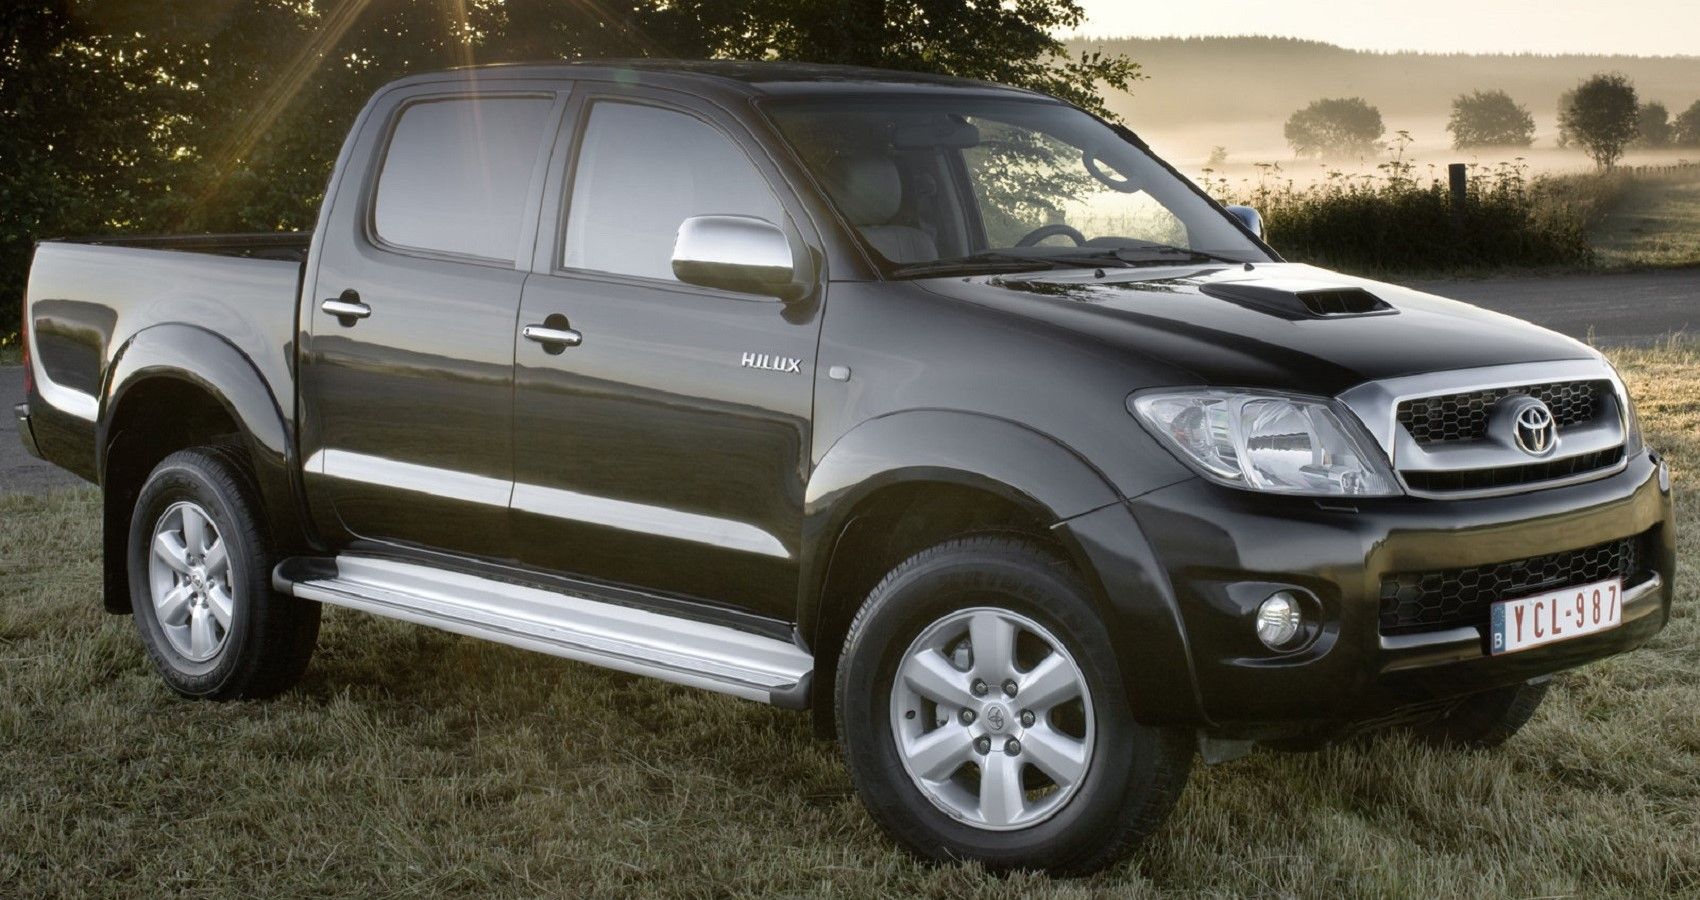 Toyota Hilux 2009, black, front quarter view on field